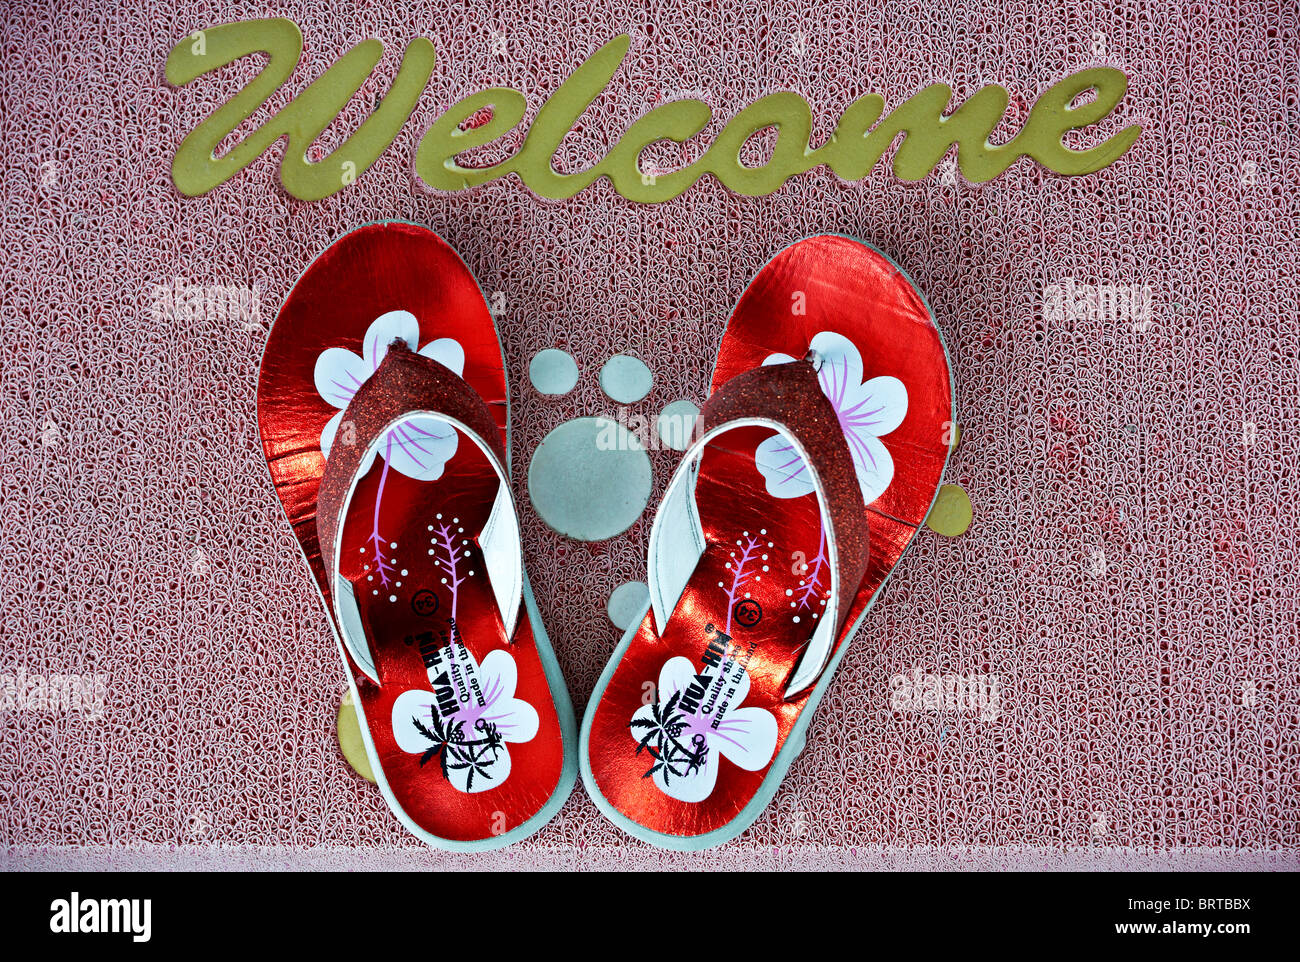 Brightly coloured flip flops on a home welcome door mat. Thailand S. E. Asia Stock Photo